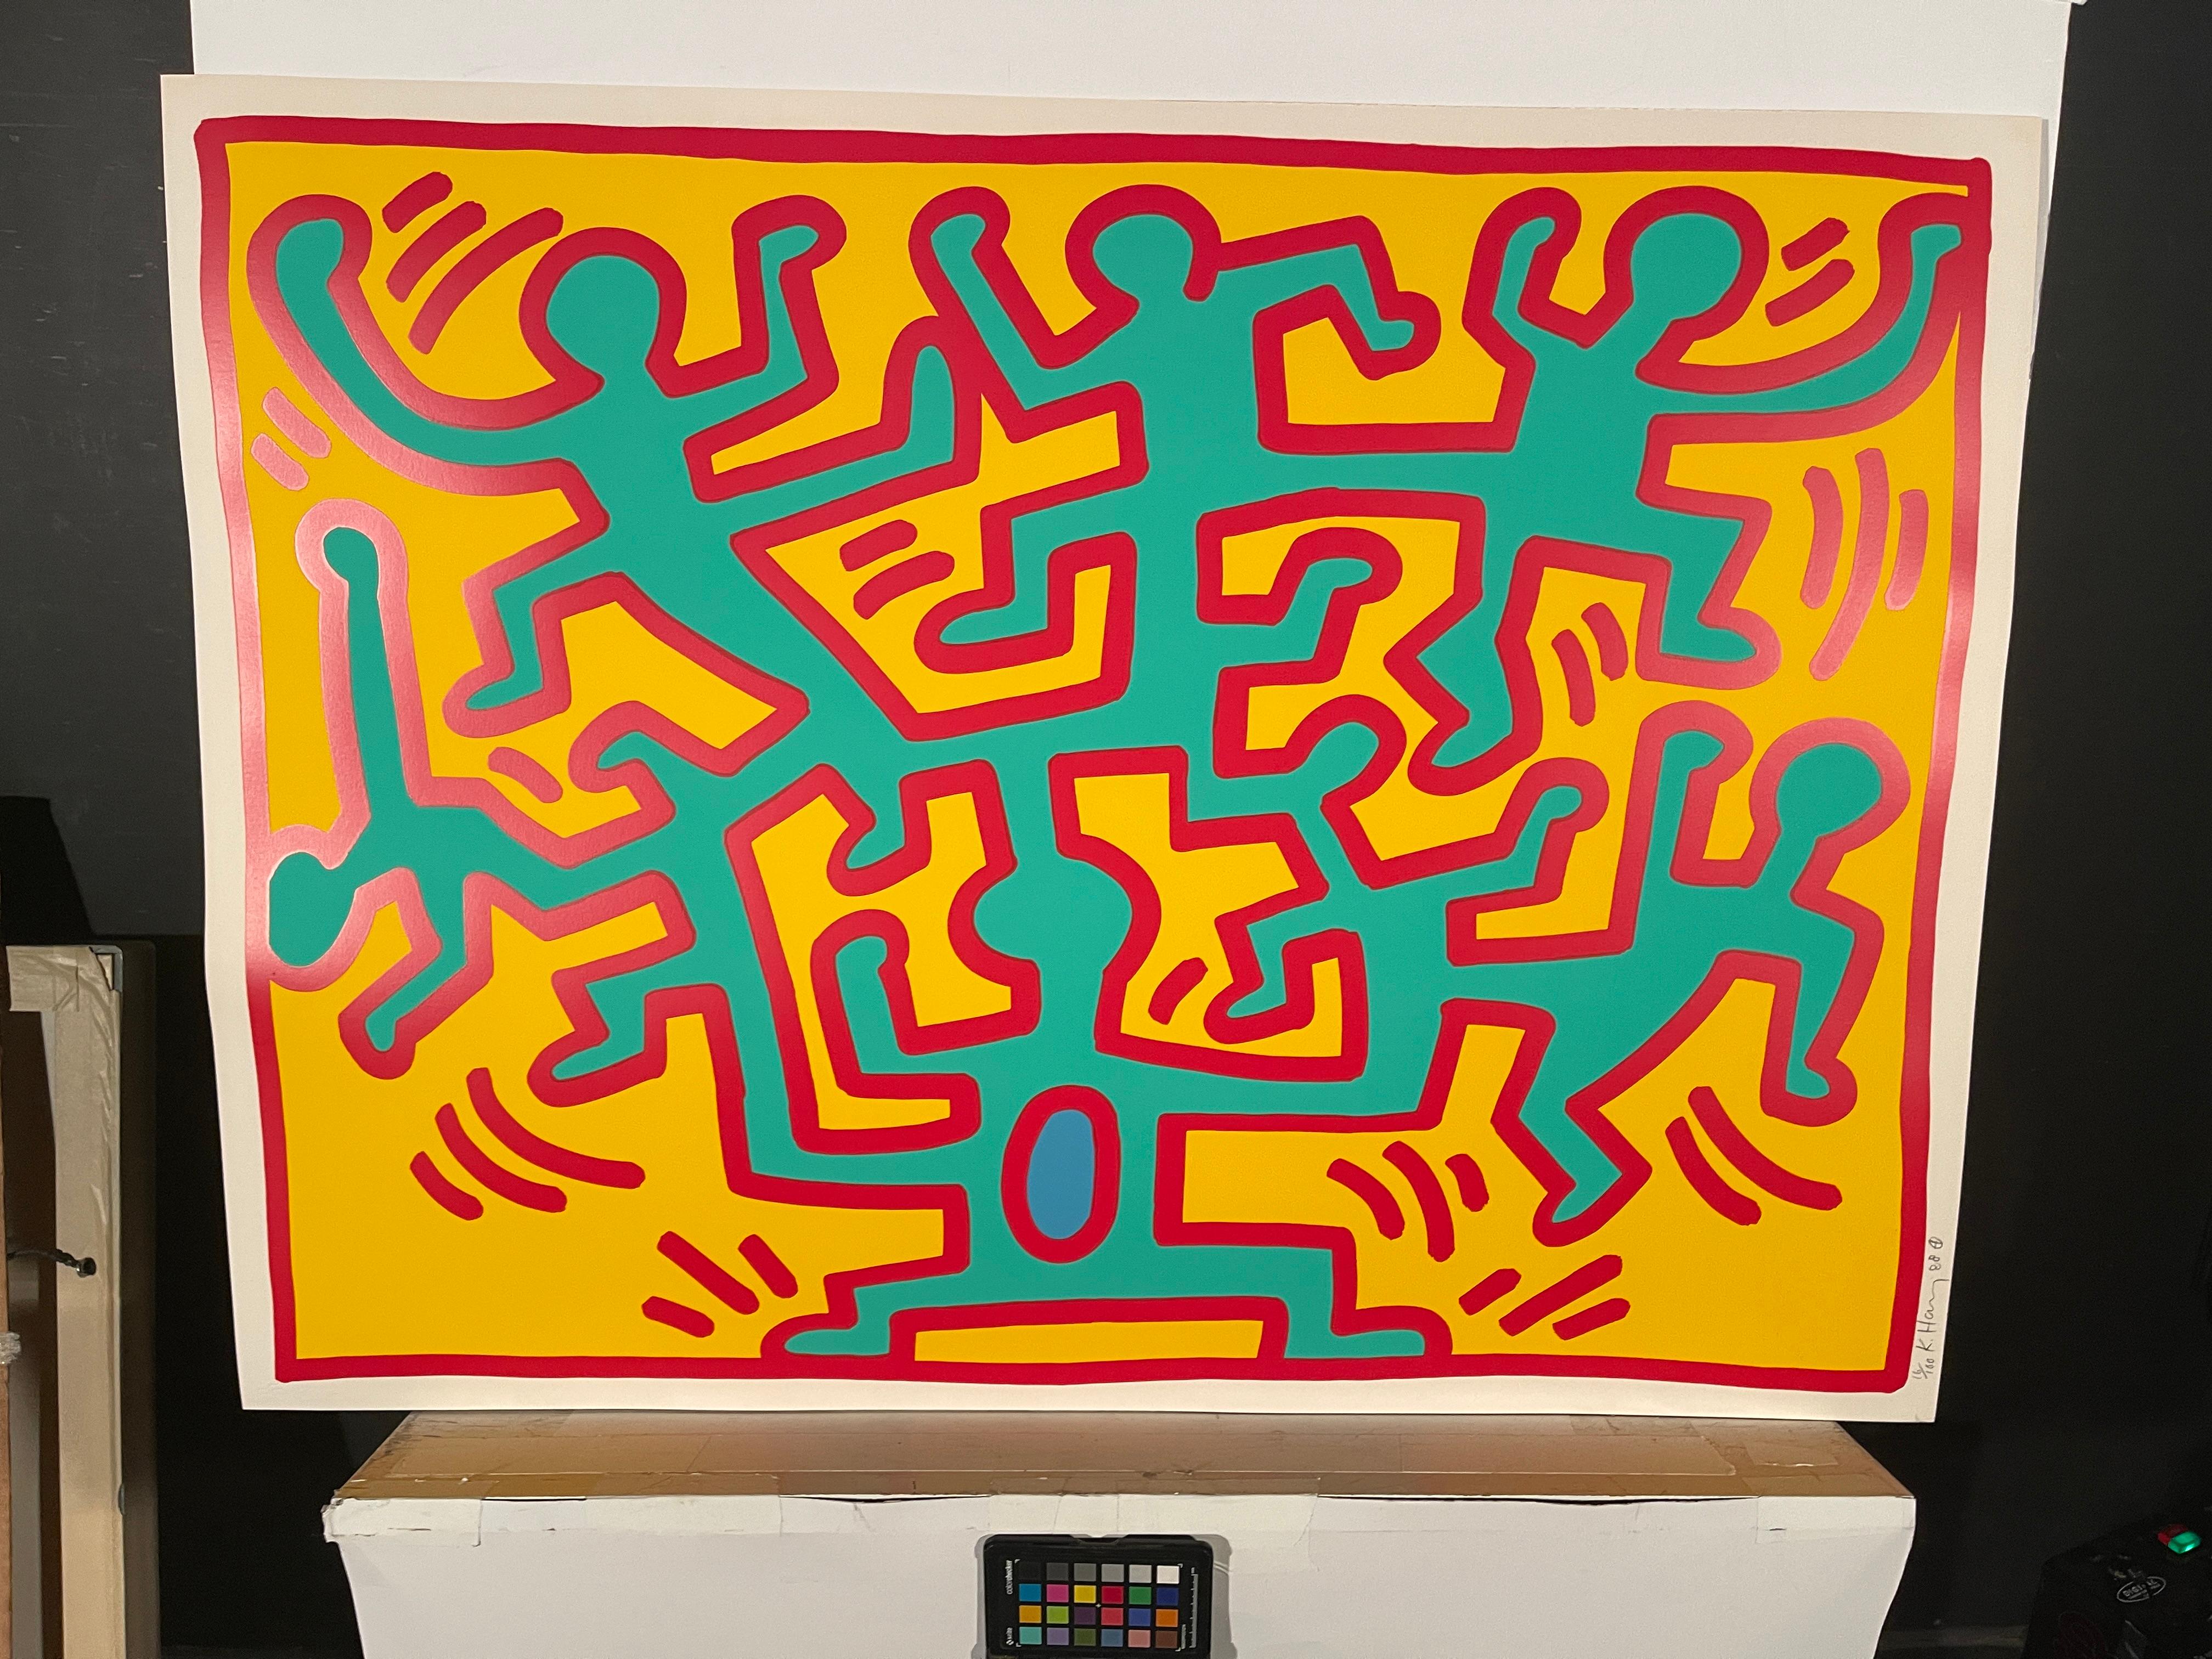 Growing 2, 1988 - Print by Keith Haring